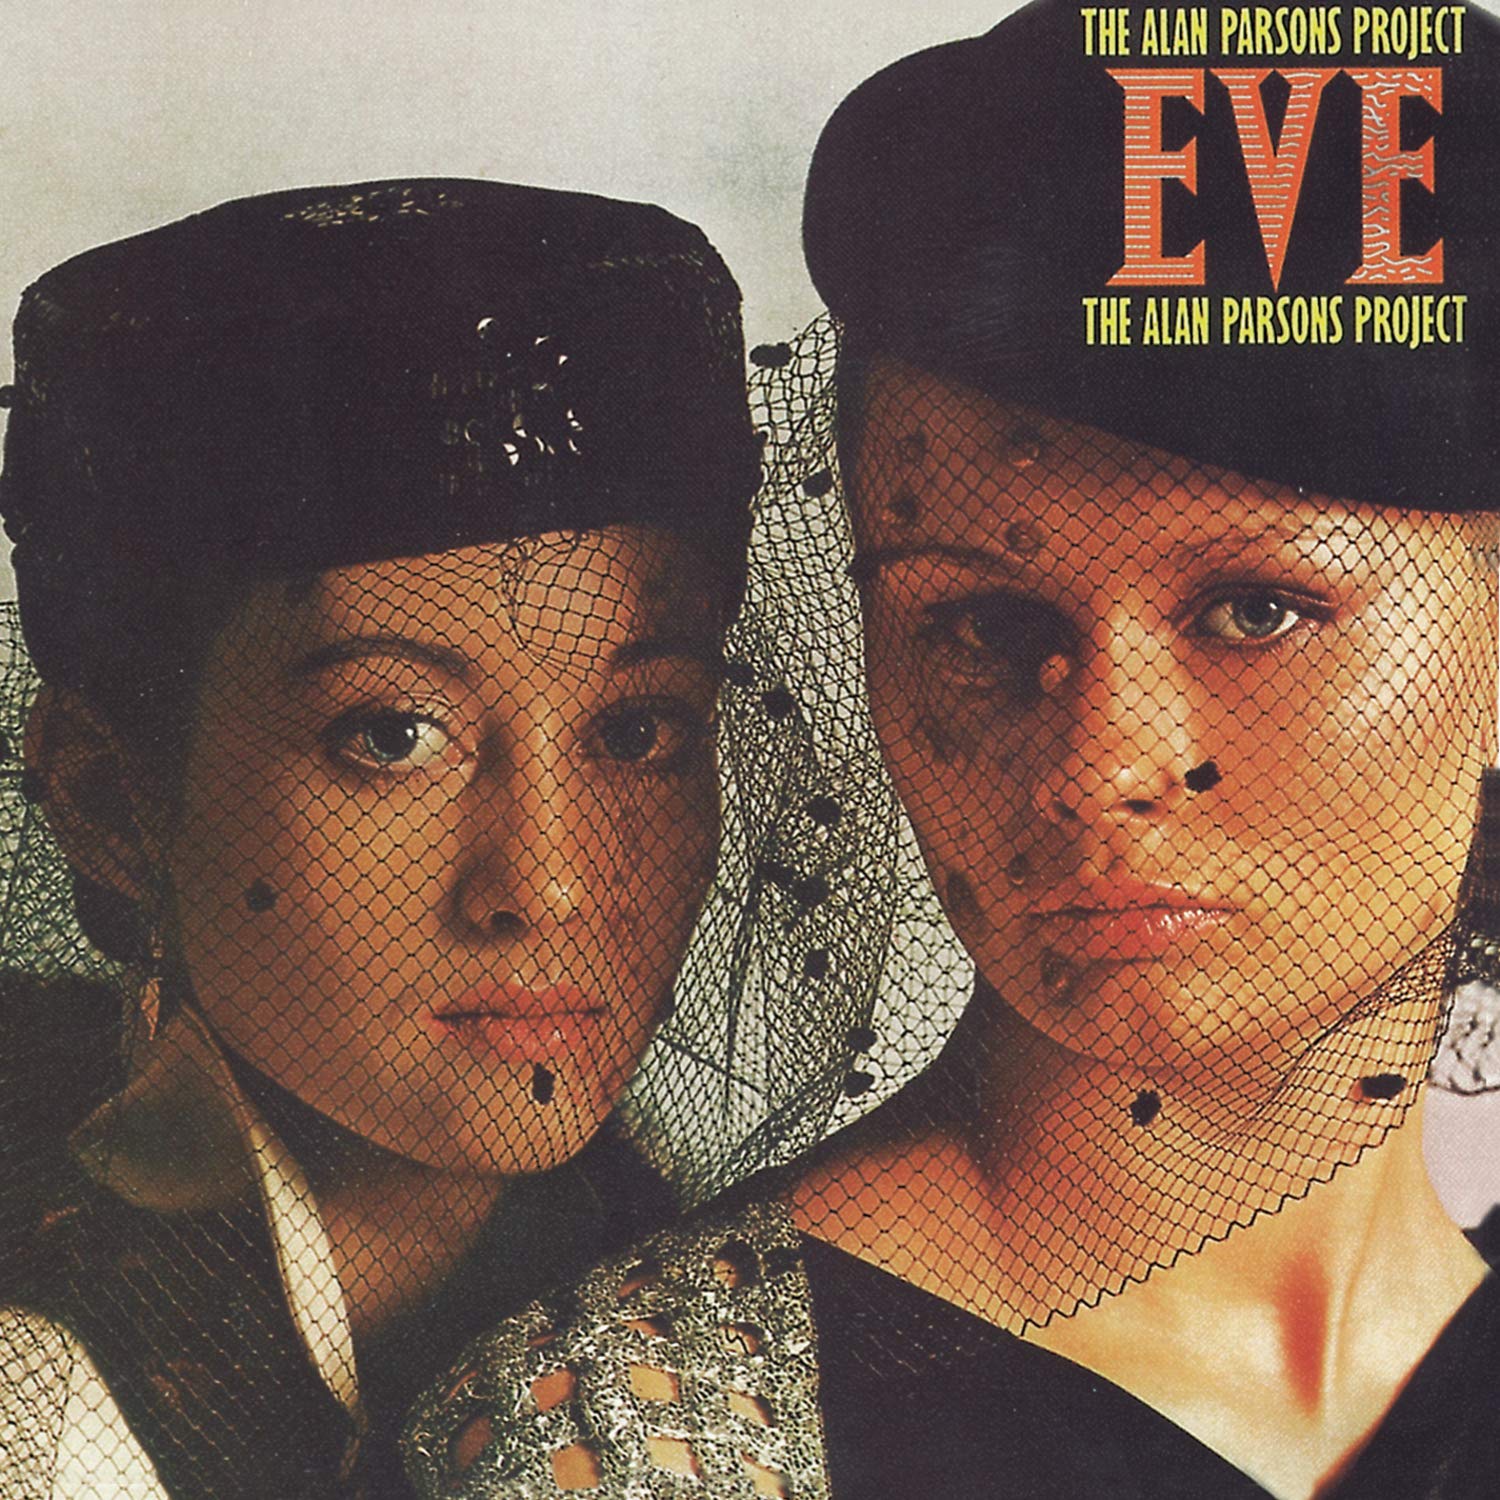 The Alan Parsons Project-Eve-(5B 201157)-LP-FLAC-1980-WRE Download